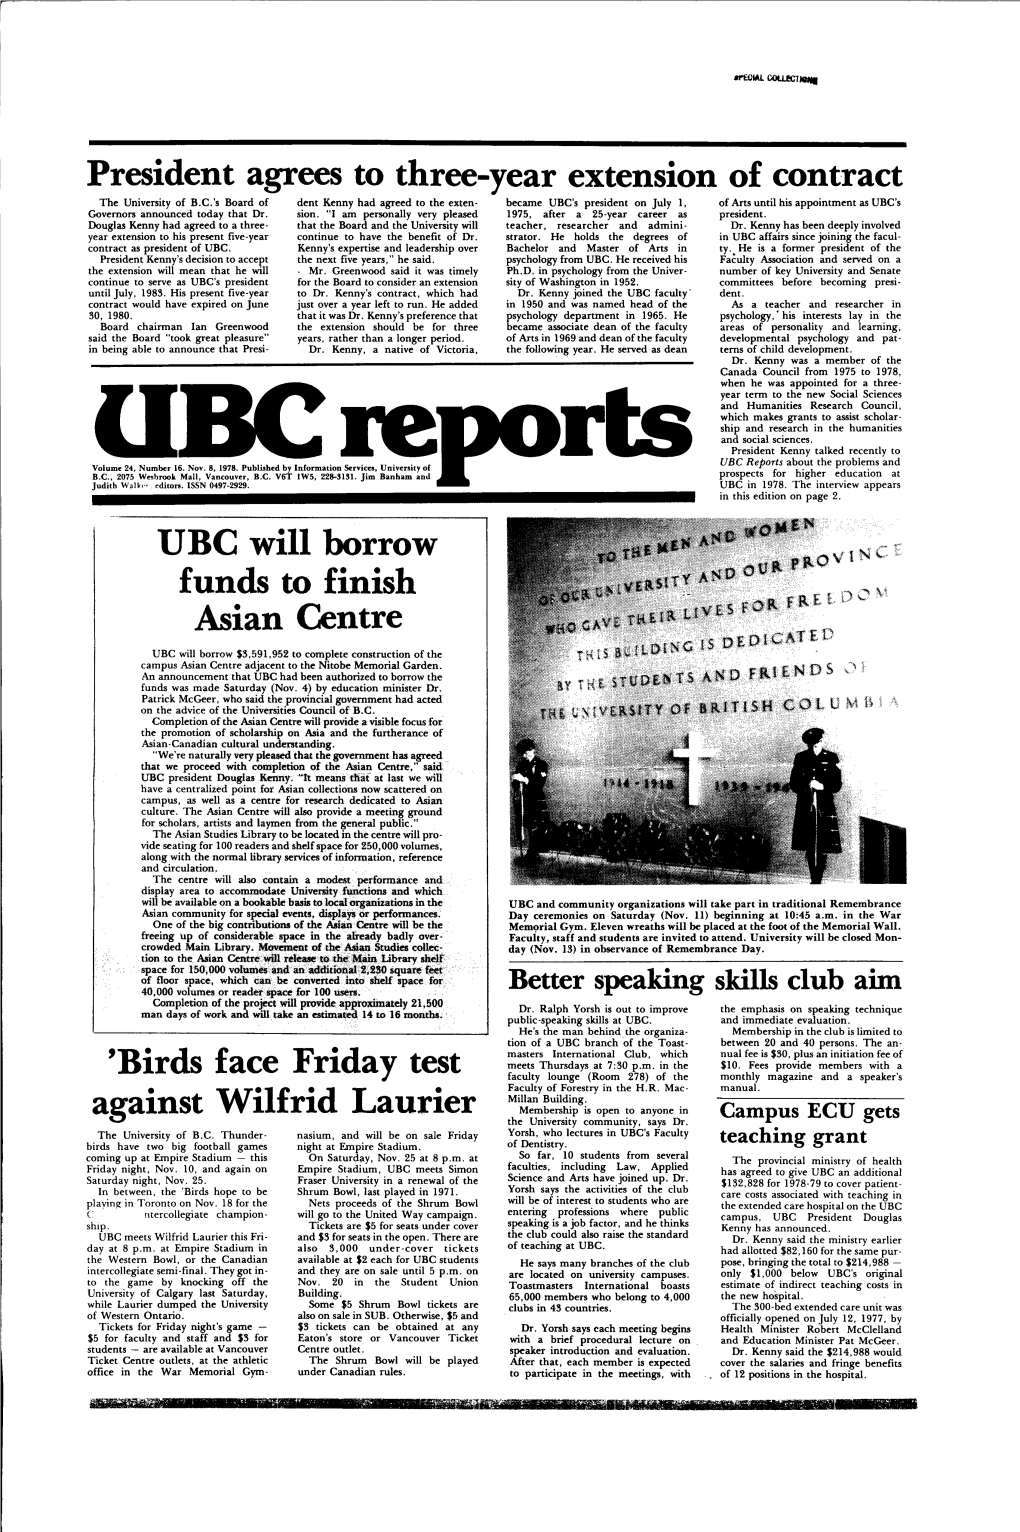 UBC Reports About the Problems and Volumeubc 24, Number 16